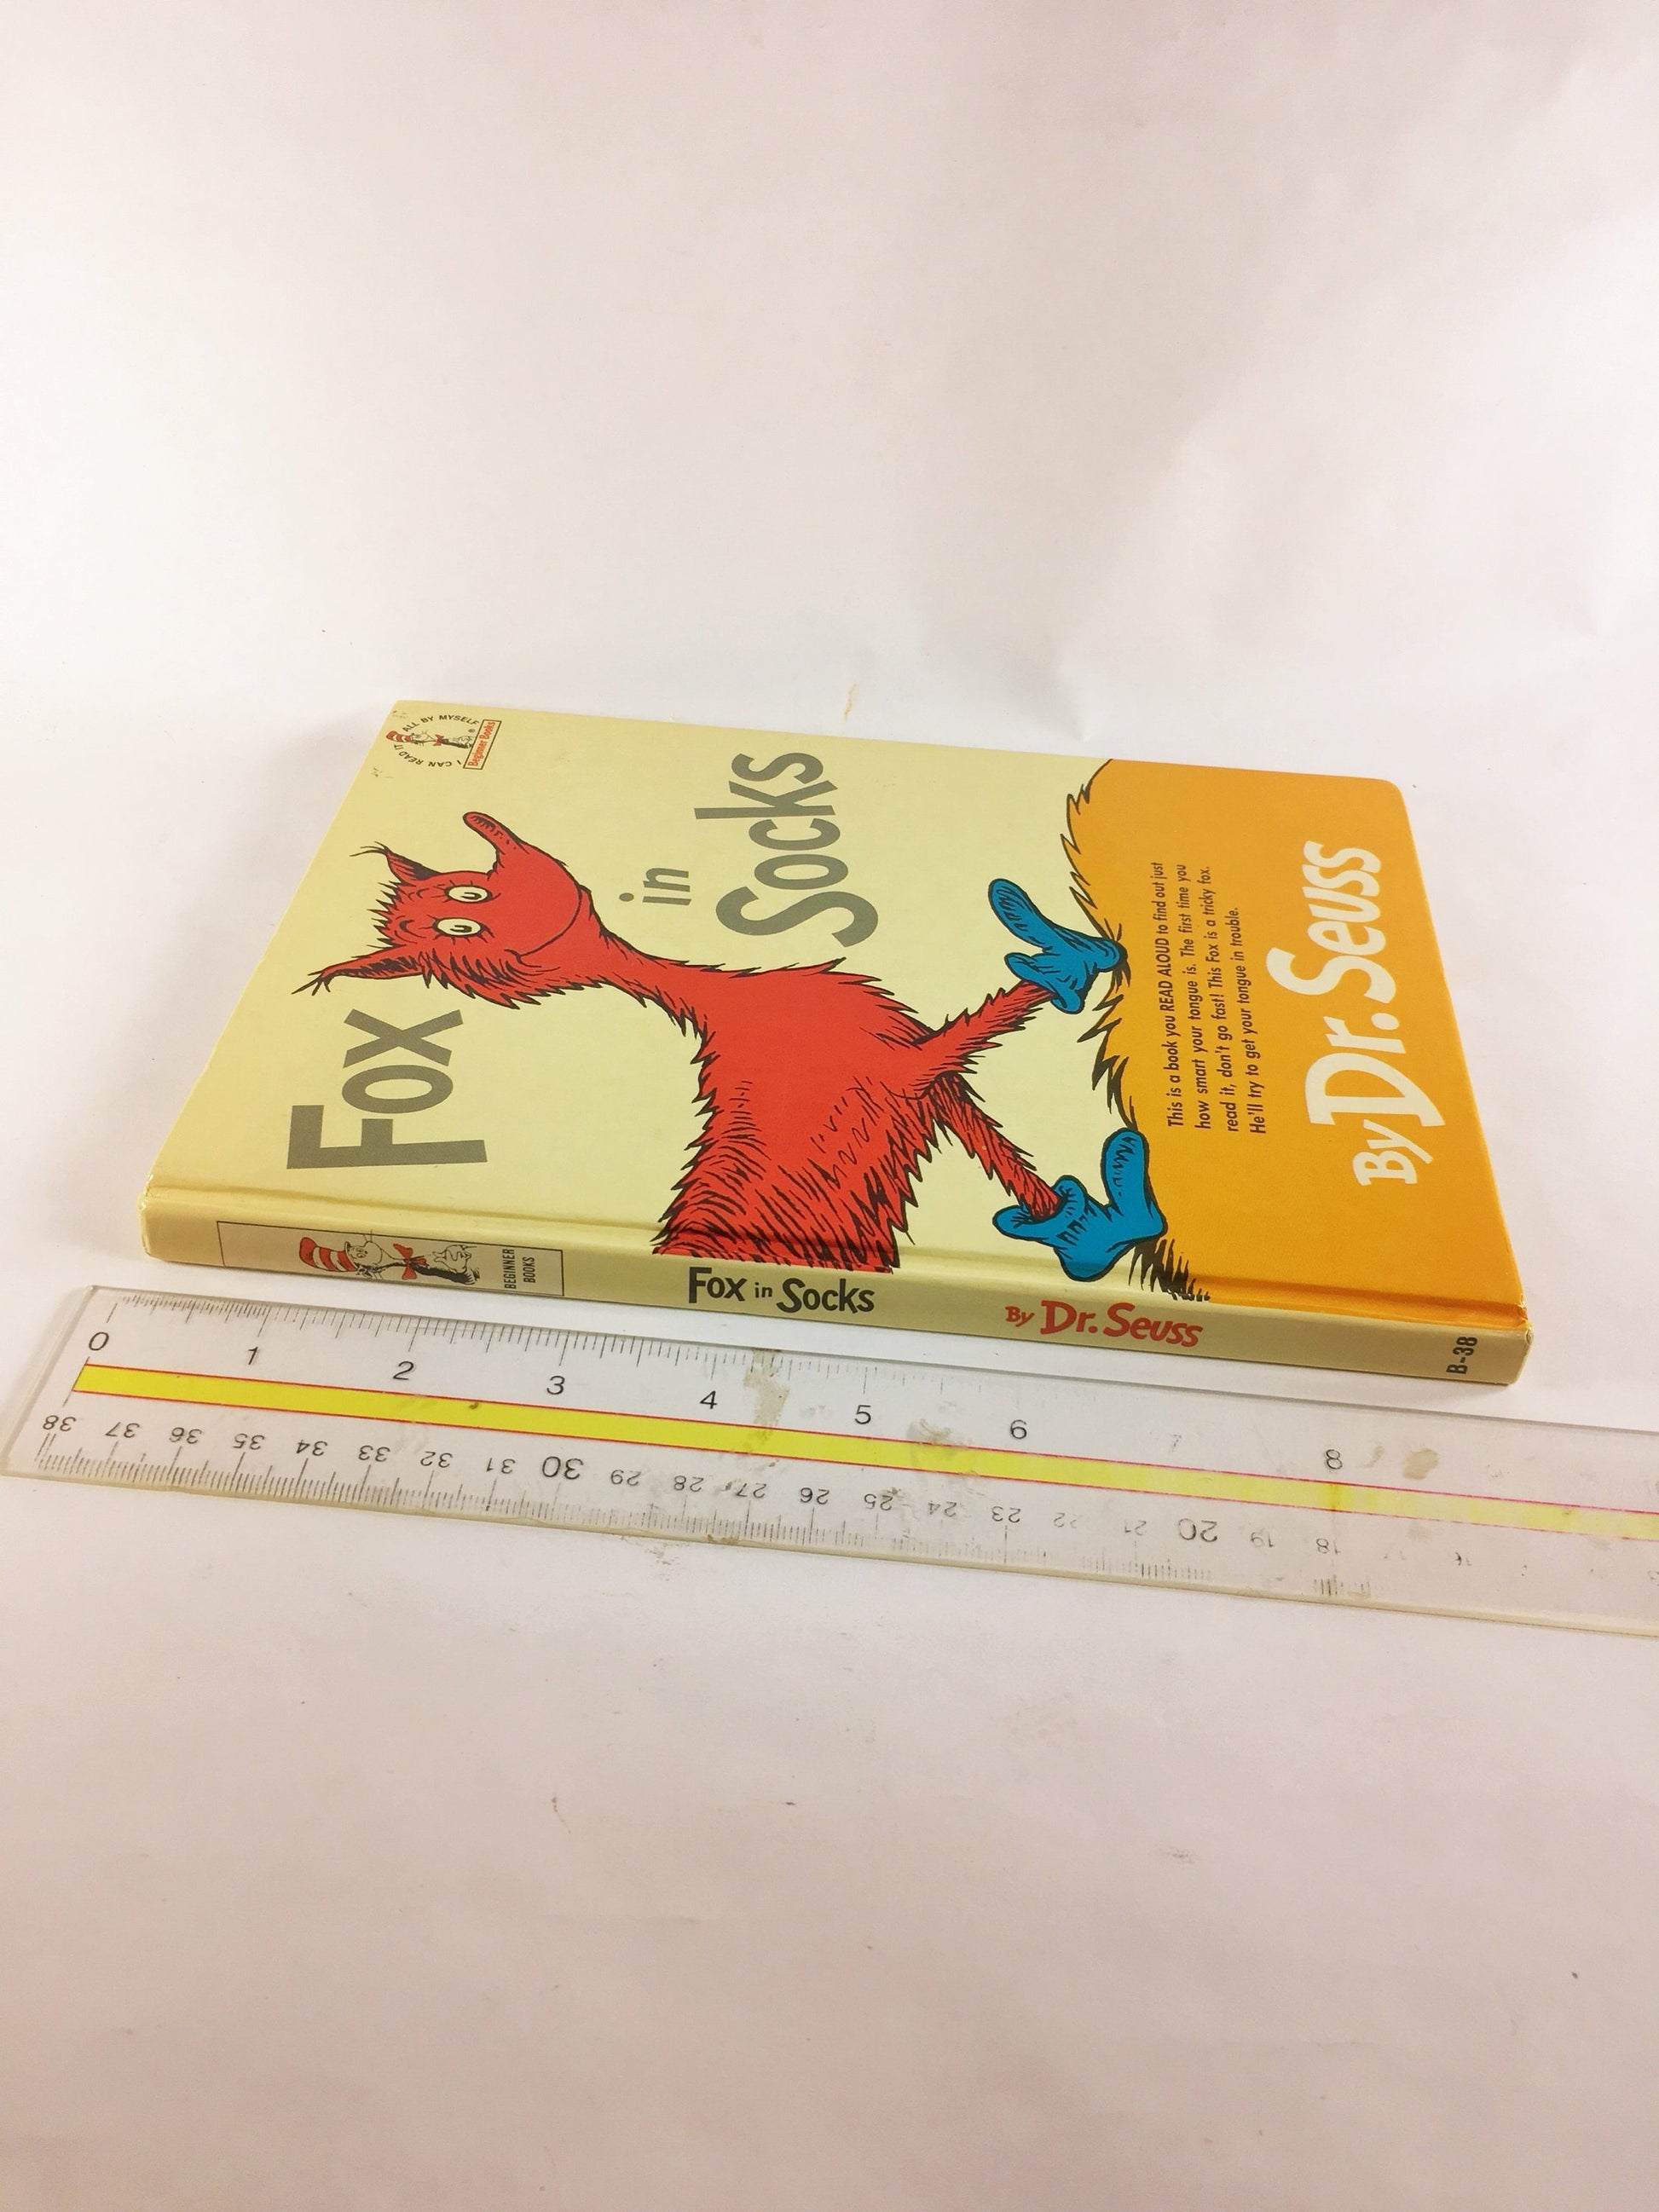 Fox in Socks by Dr Seuss EARLY PRINTING Vintage Beginner Reader book Random House. Easter Collector gift